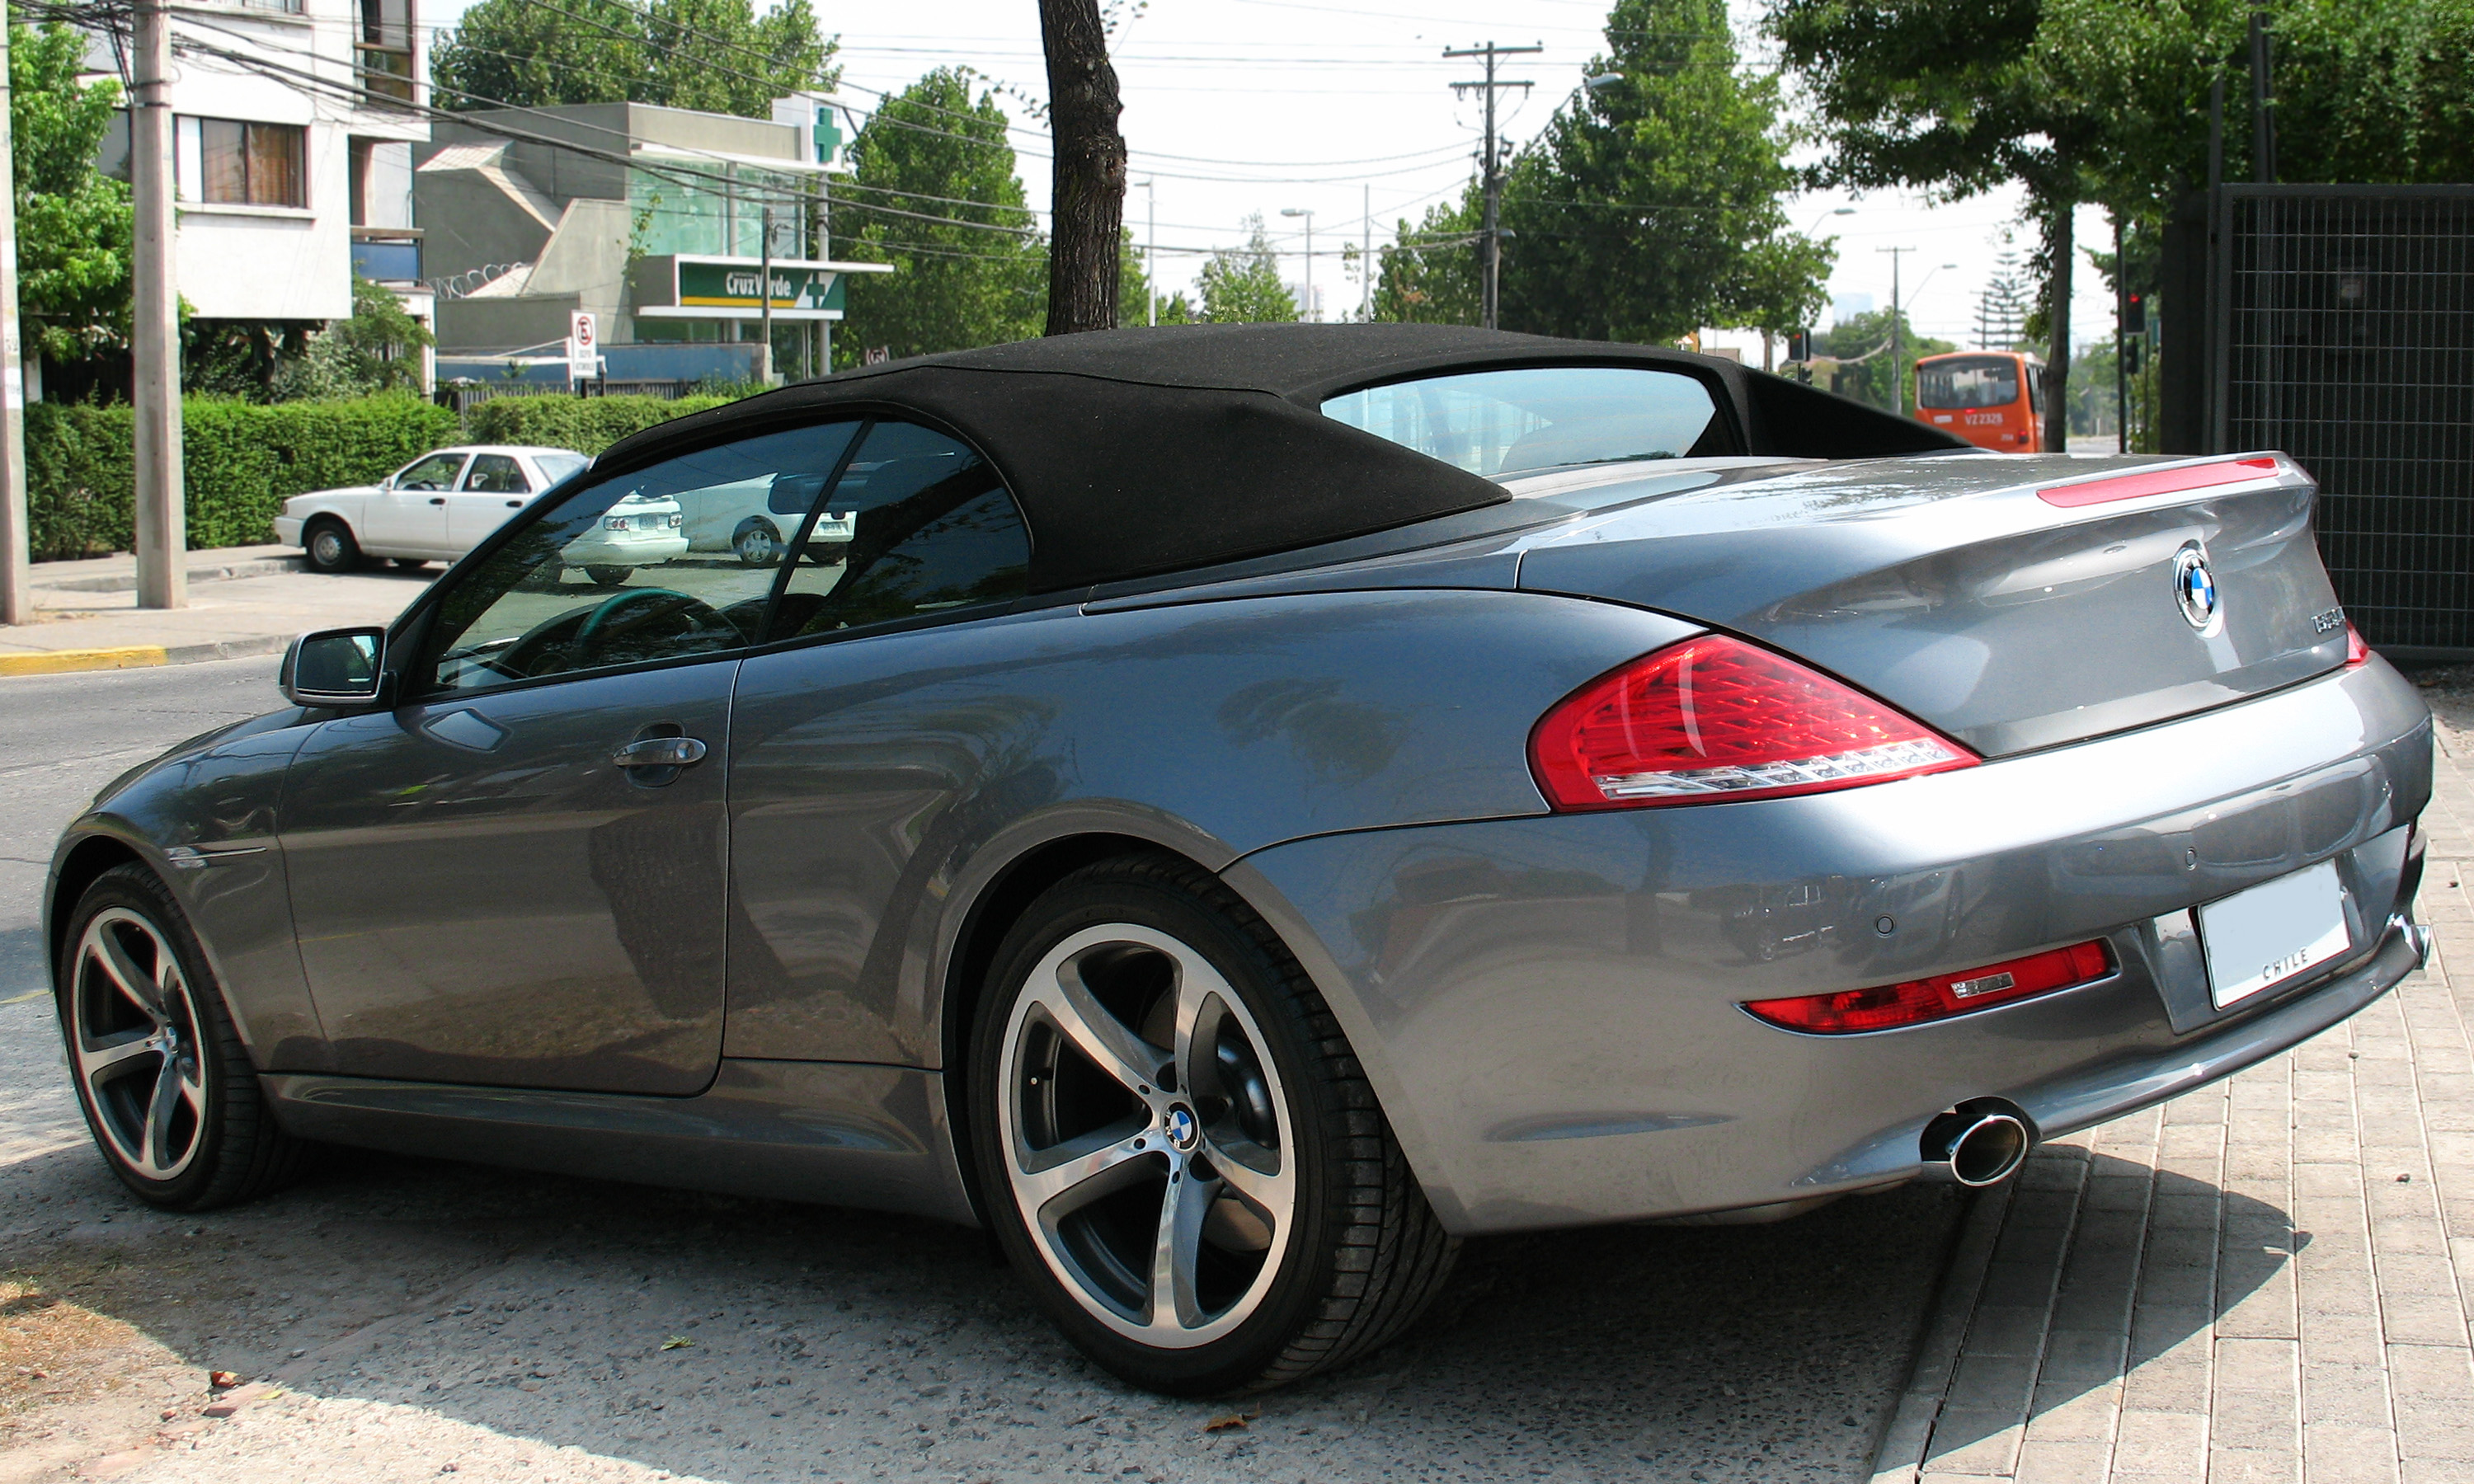 File:BMW 650i Cabriolet 2009 (44195065595).jpg - Wikimedia Commons